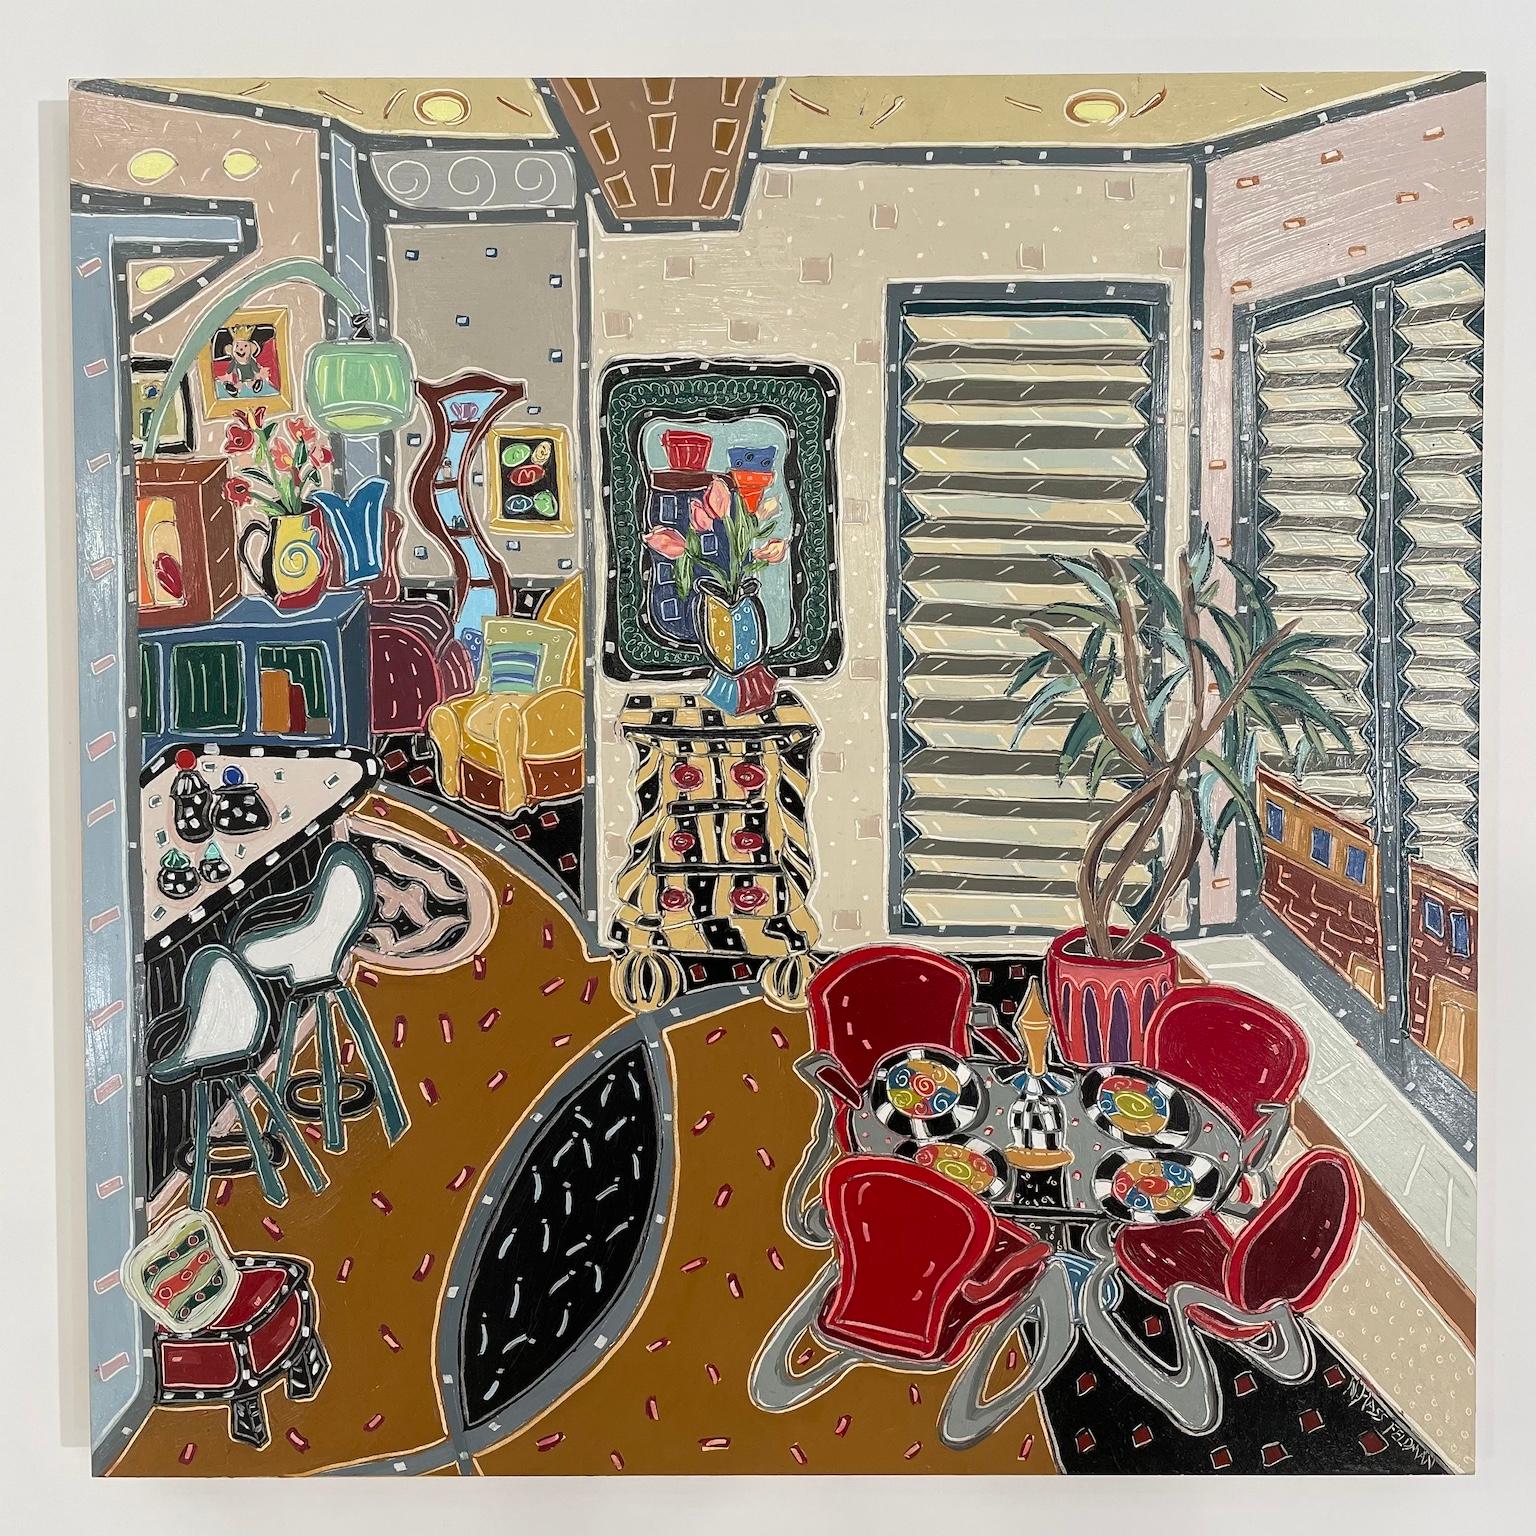 Colorful Apartment Interior with Venetian Blinds. Title - Pied-á-Terre in Boston - Fauvist Painting by Nan Hass Feldman